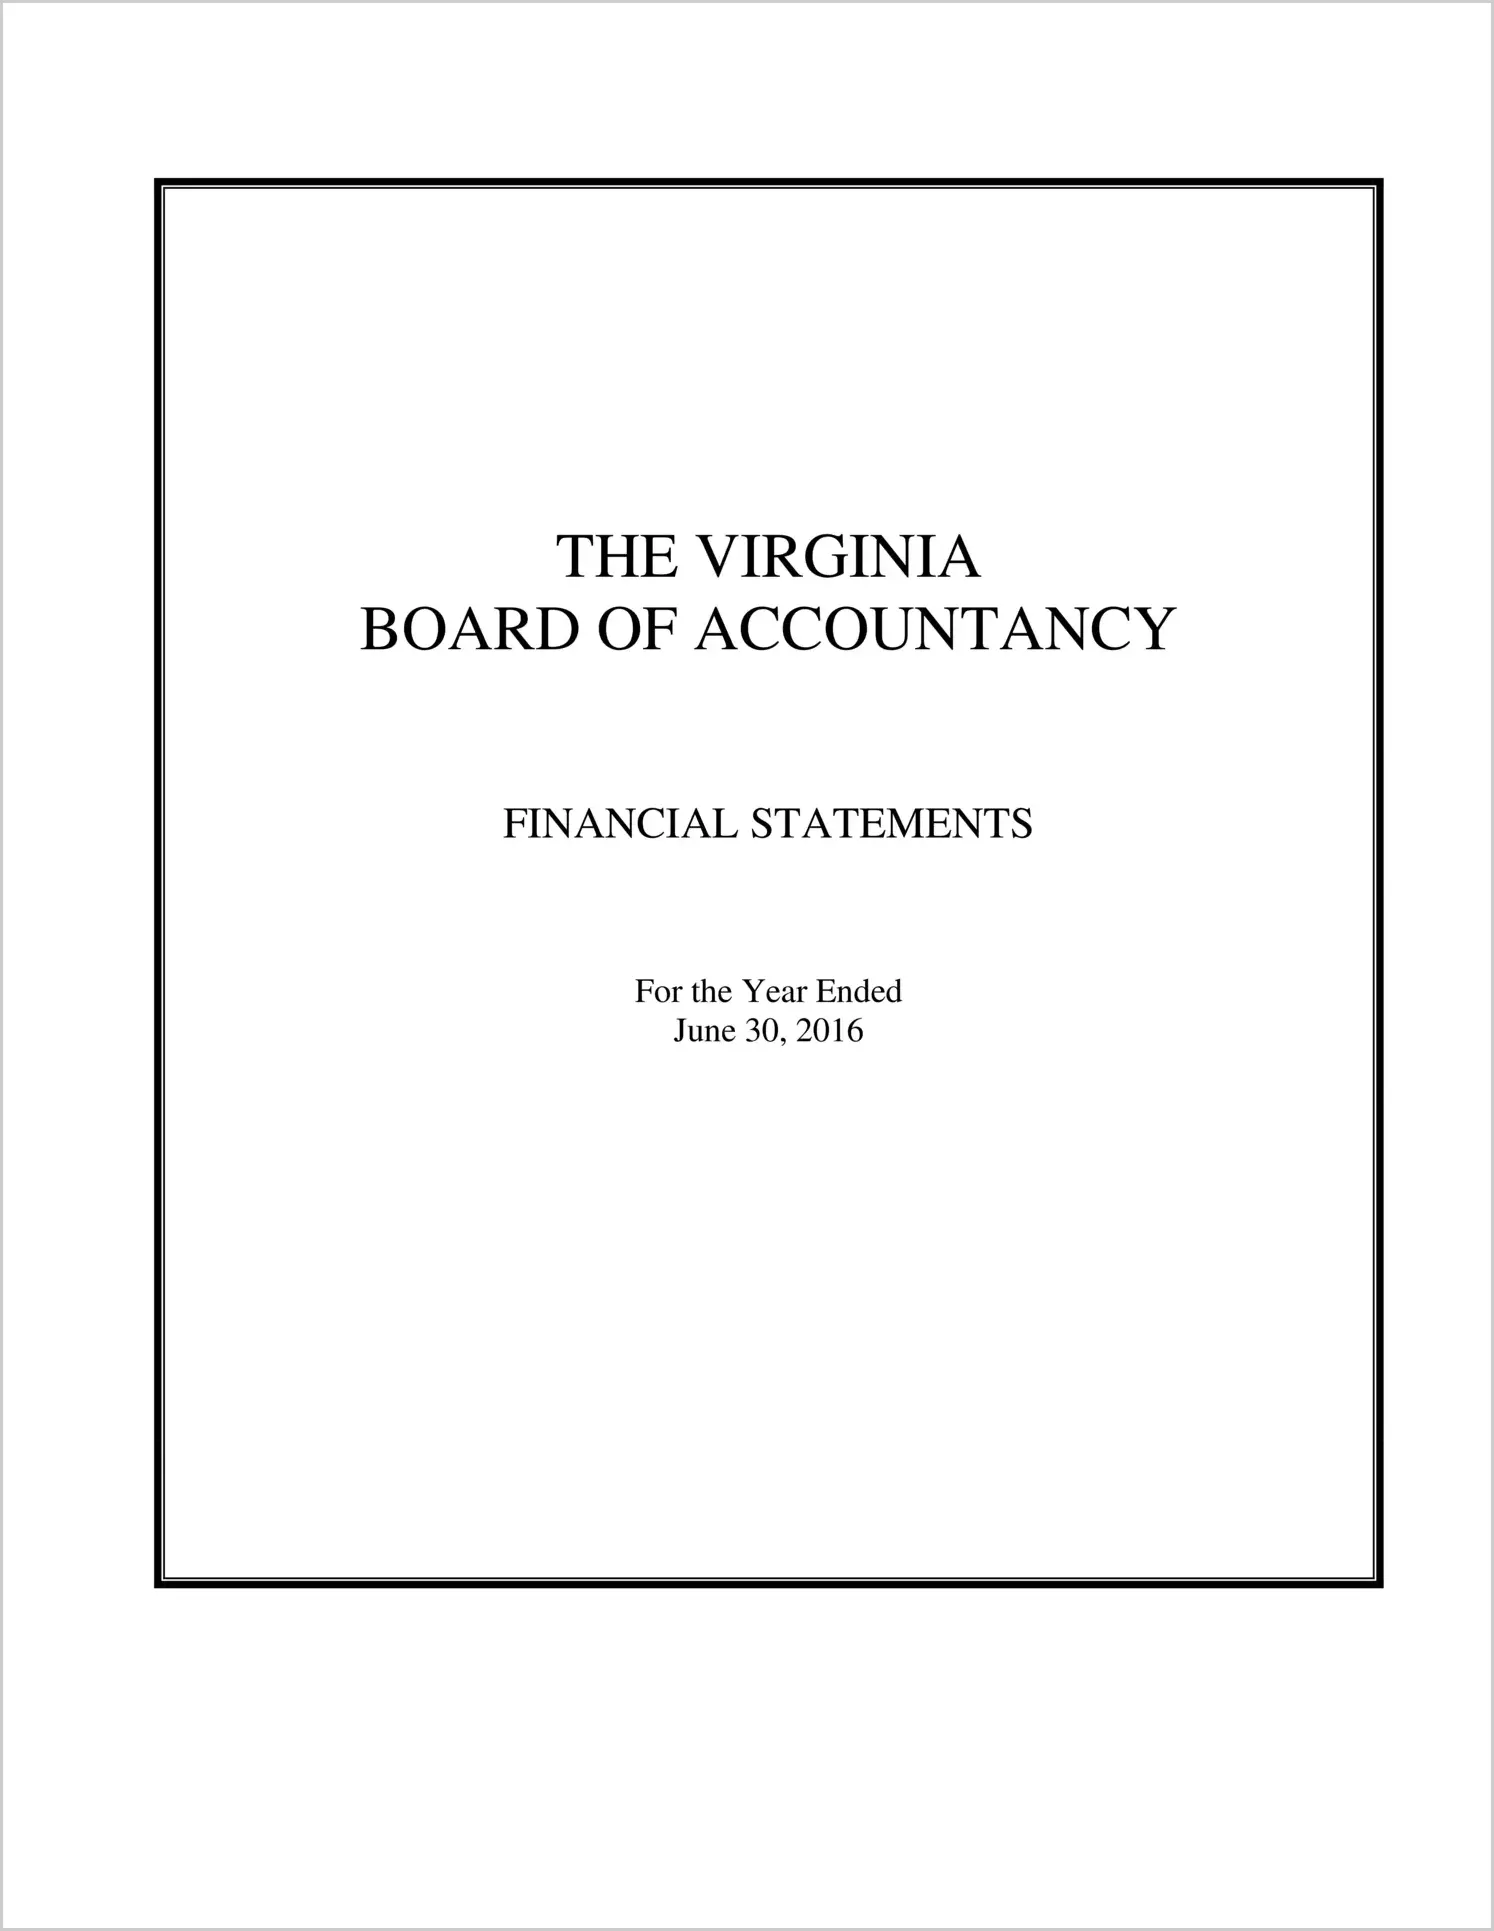 Virginia Board of Accountancy Financial Statements for the year ended June 30, 2016